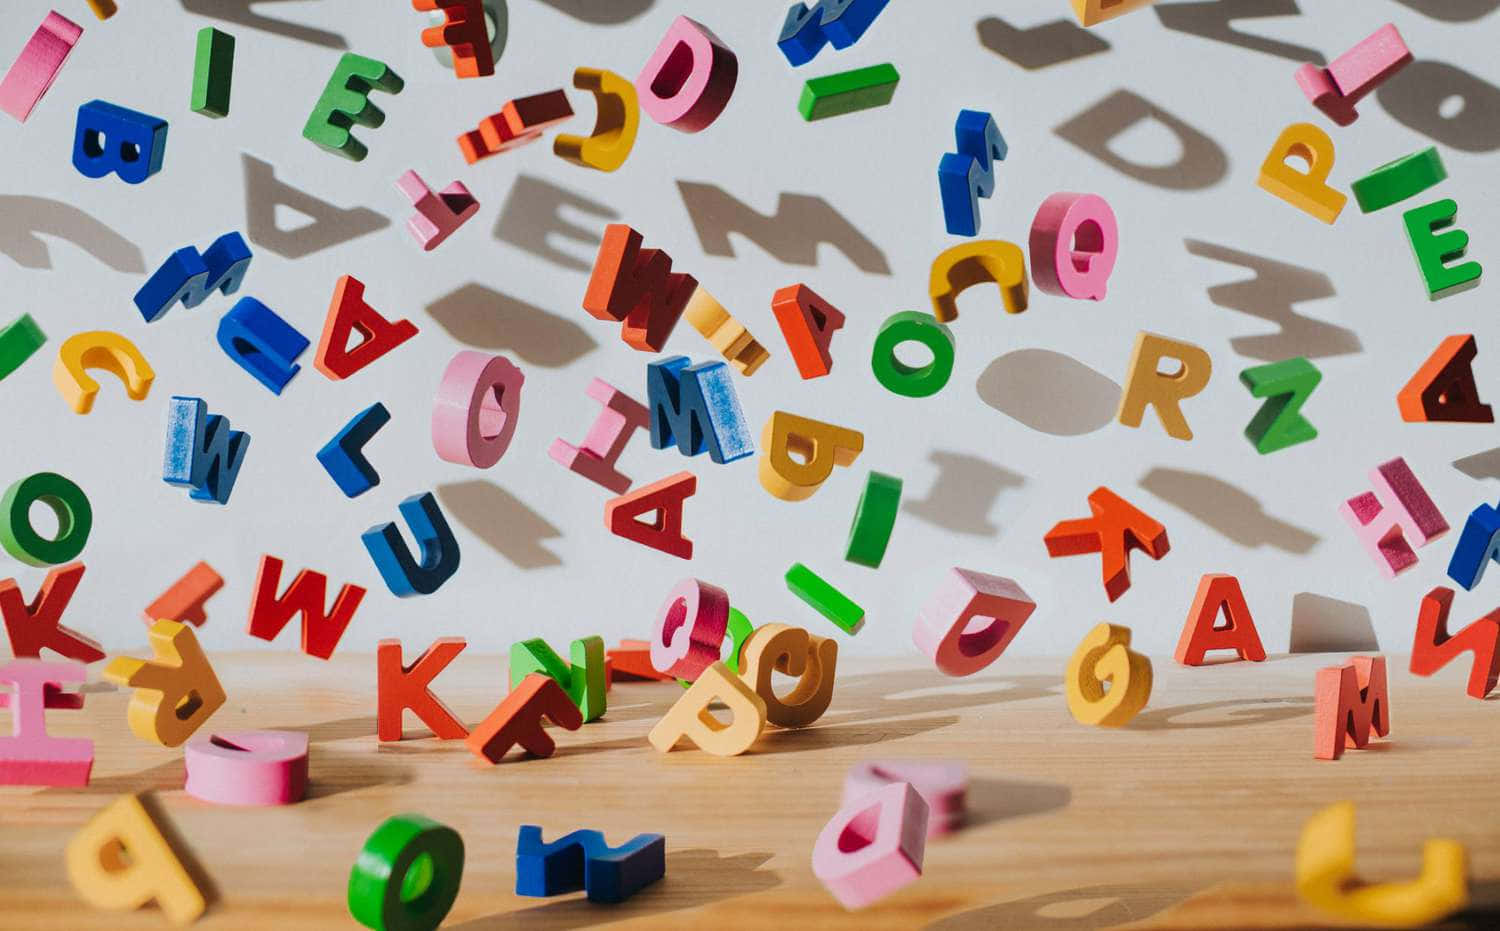 A vibrant and complex view on Alphabet